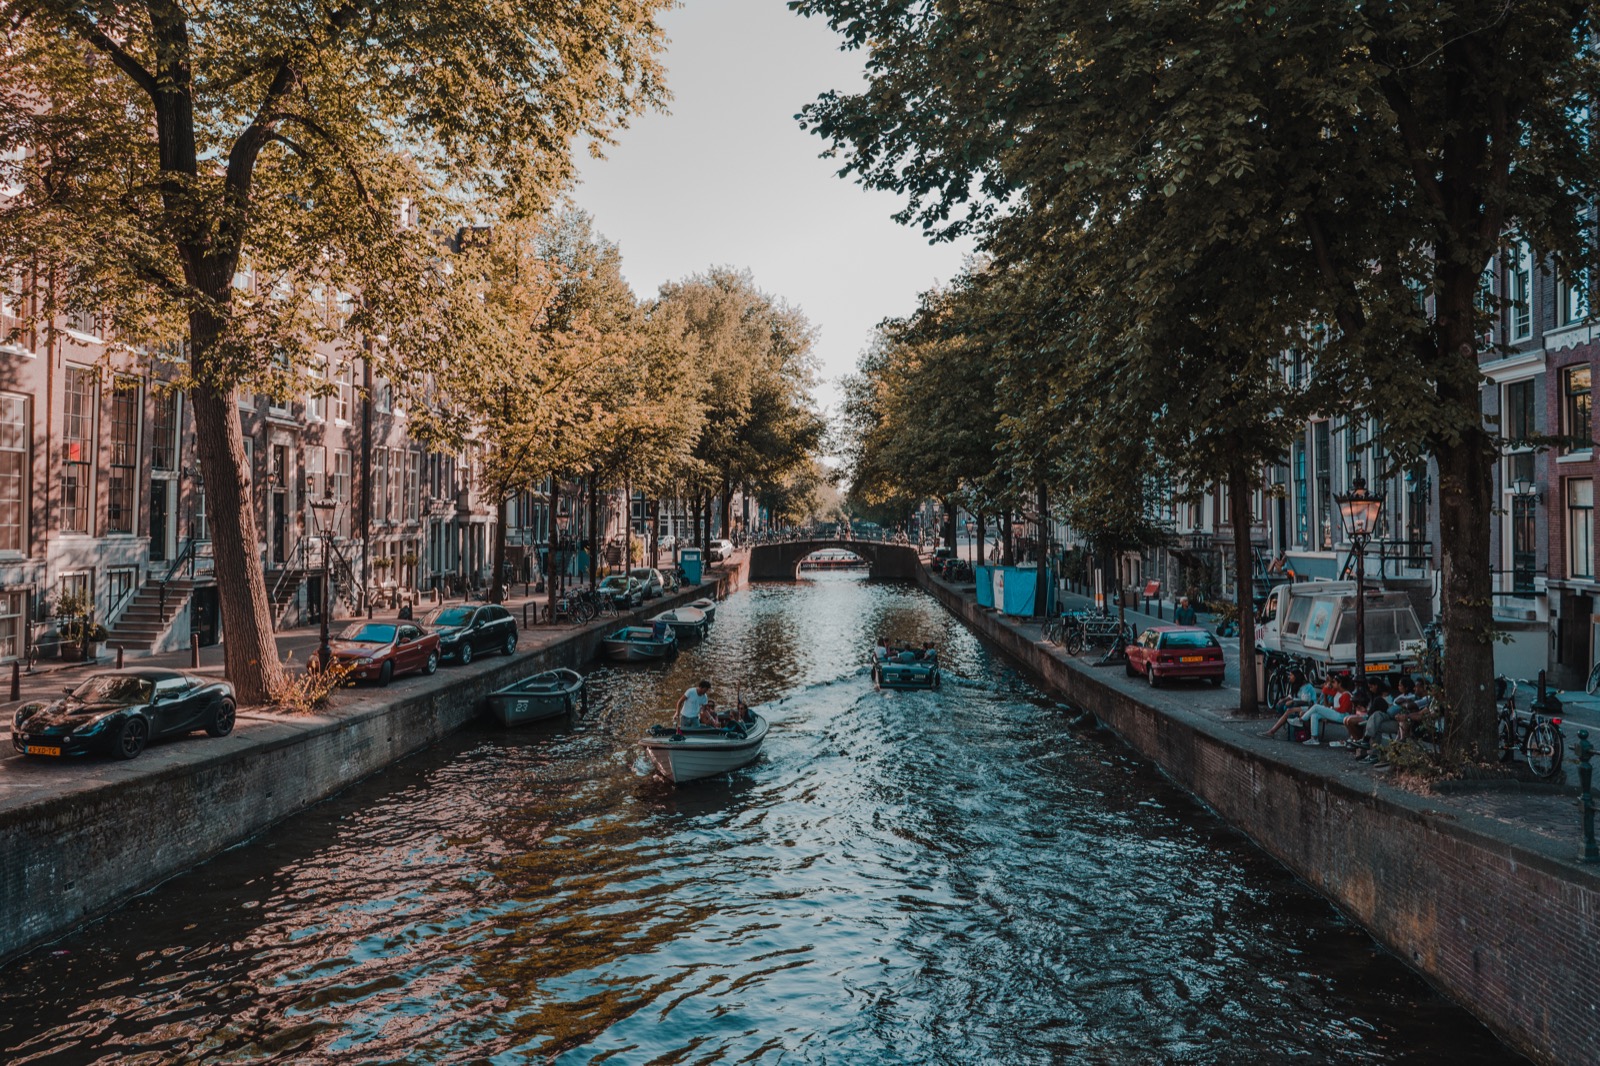 We’ll Give You an 🌮 International Food to Try Based on the ✈️ Places You Would Rather Visit Amsterdam, The Netherlands